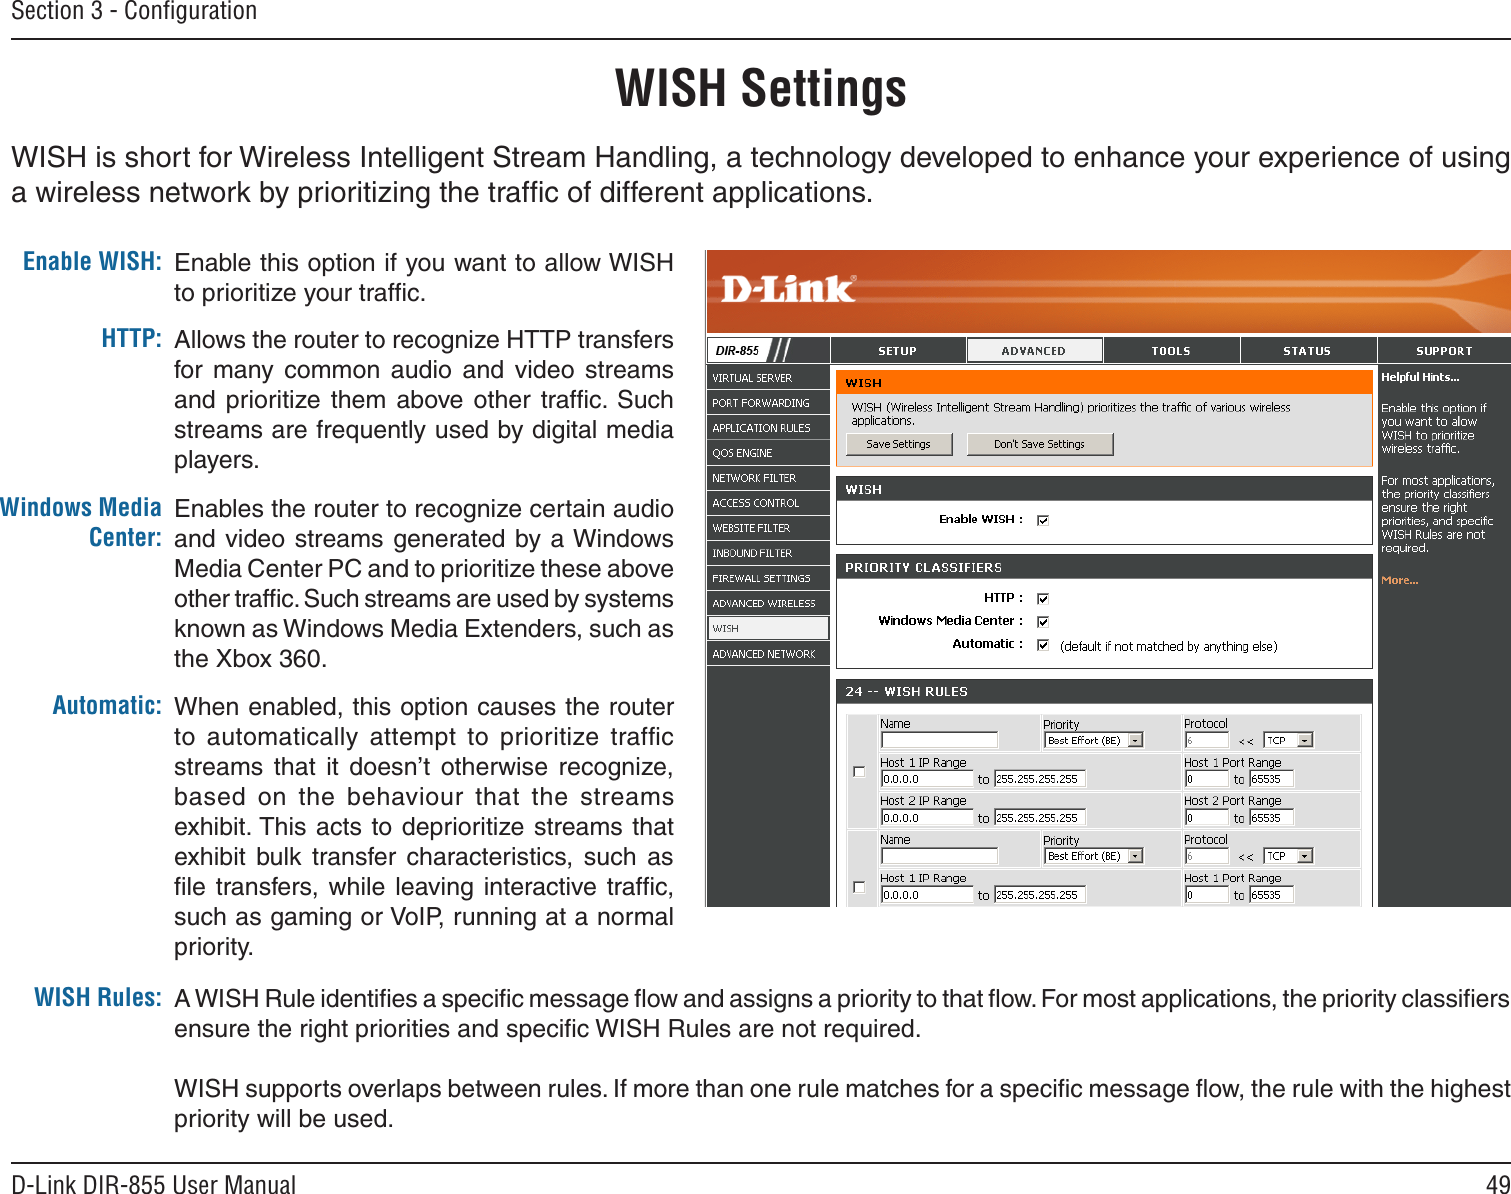 49D-Link DIR-855 User ManualSection 3 - ConﬁgurationWISH SettingsWISH is short for Wireless Intelligent Stream Handling, a technology developed to enhance your experience of using a wireless network by prioritizing the trafﬁc of different applications. Enable this option if you want to allow WISH to prioritize your trafﬁc. Enable WISH:Allows the router to recognize HTTP transfers for  many  common  audio  and  video  streams and  prioritize them  above other  trafﬁc. Such streams are frequently used by digital media players. HTTP:Enables the router to recognize certain audio and video streams generated by a Windows Media Center PC and to prioritize these above other trafﬁc. Such streams are used by systems known as Windows Media Extenders, such as the Xbox 360. Windows Media Center:When enabled, this option causes the router to  automatically  attempt  to  prioritize  trafﬁc streams  that  it  doesn’t  otherwise  recognize, based  on  the  behaviour that  the  streams exhibit. This  acts to deprioritize streams that exhibit  bulk  transfer  characteristics,  such  as ﬁle transfers, while  leaving interactive  trafﬁc, such as gaming or VoIP, running at a normal priority.Automatic:WISH Rules: A WISH Rule identiﬁes a speciﬁc message ﬂow and assigns a priority to that ﬂow. For most applications, the priority classiﬁers ensure the right priorities and speciﬁc WISH Rules are not required. WISH supports overlaps between rules. If more than one rule matches for a speciﬁc message ﬂow, the rule with the highest priority will be used. 